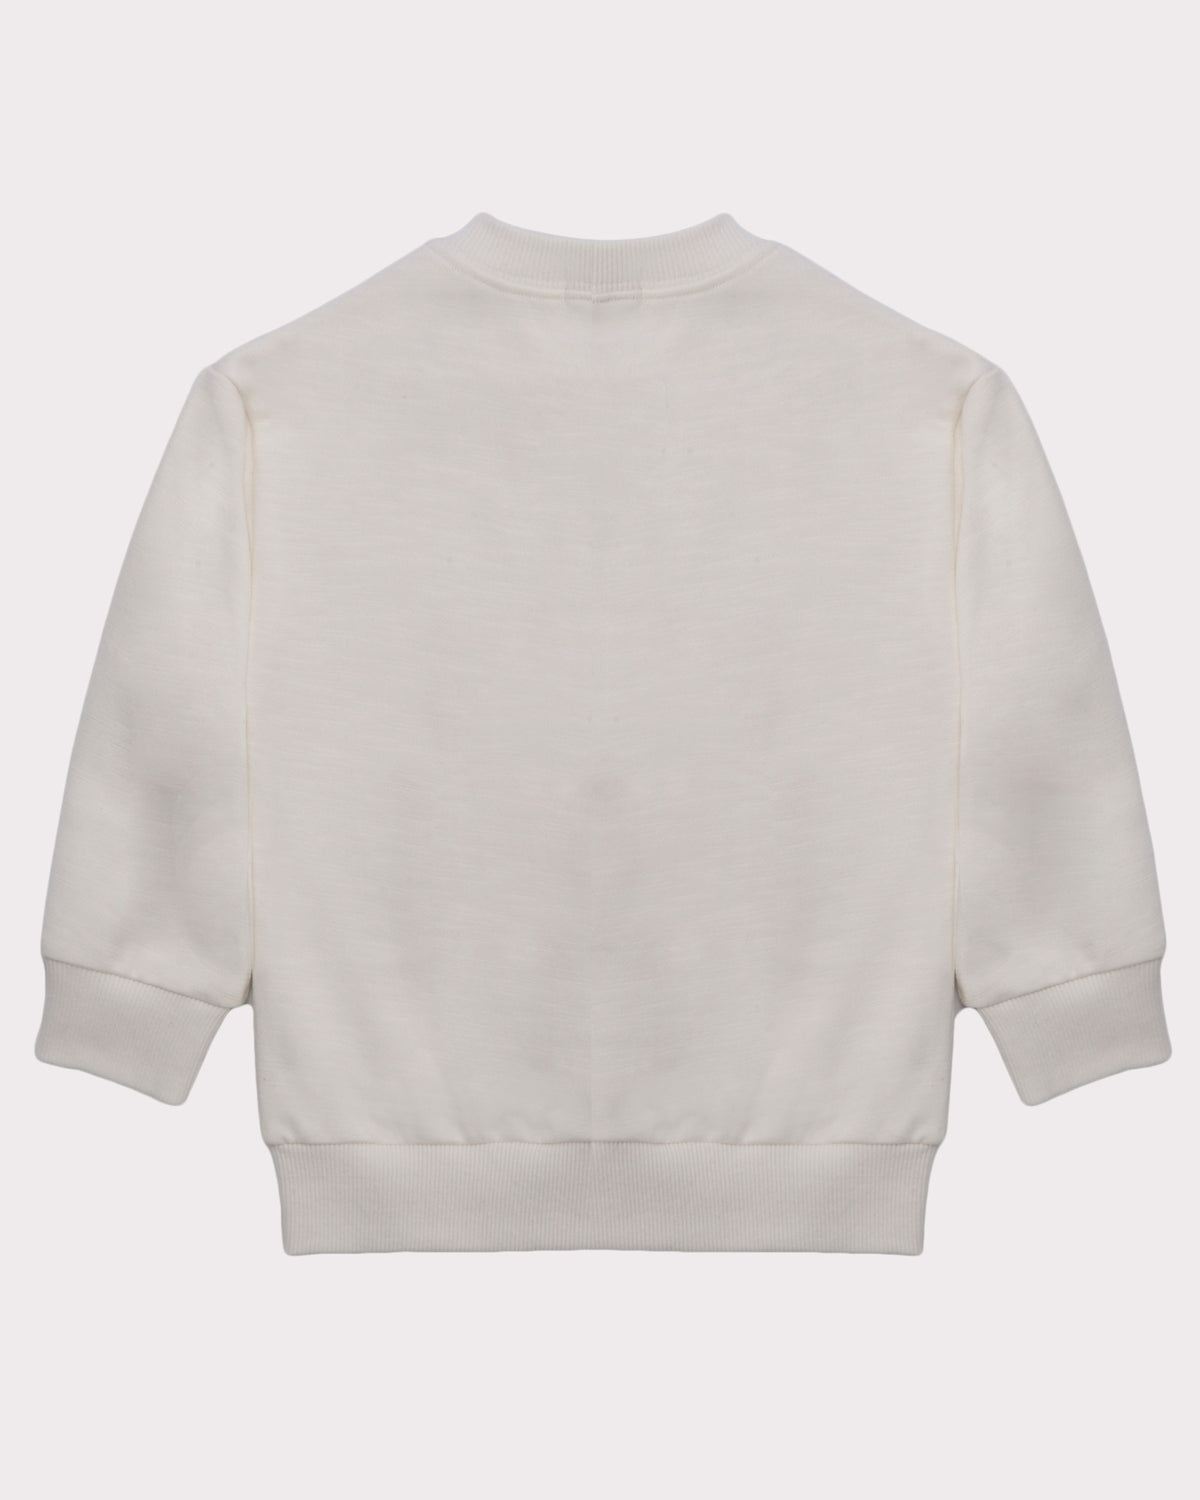 Sing It Out Loud Jumper white front